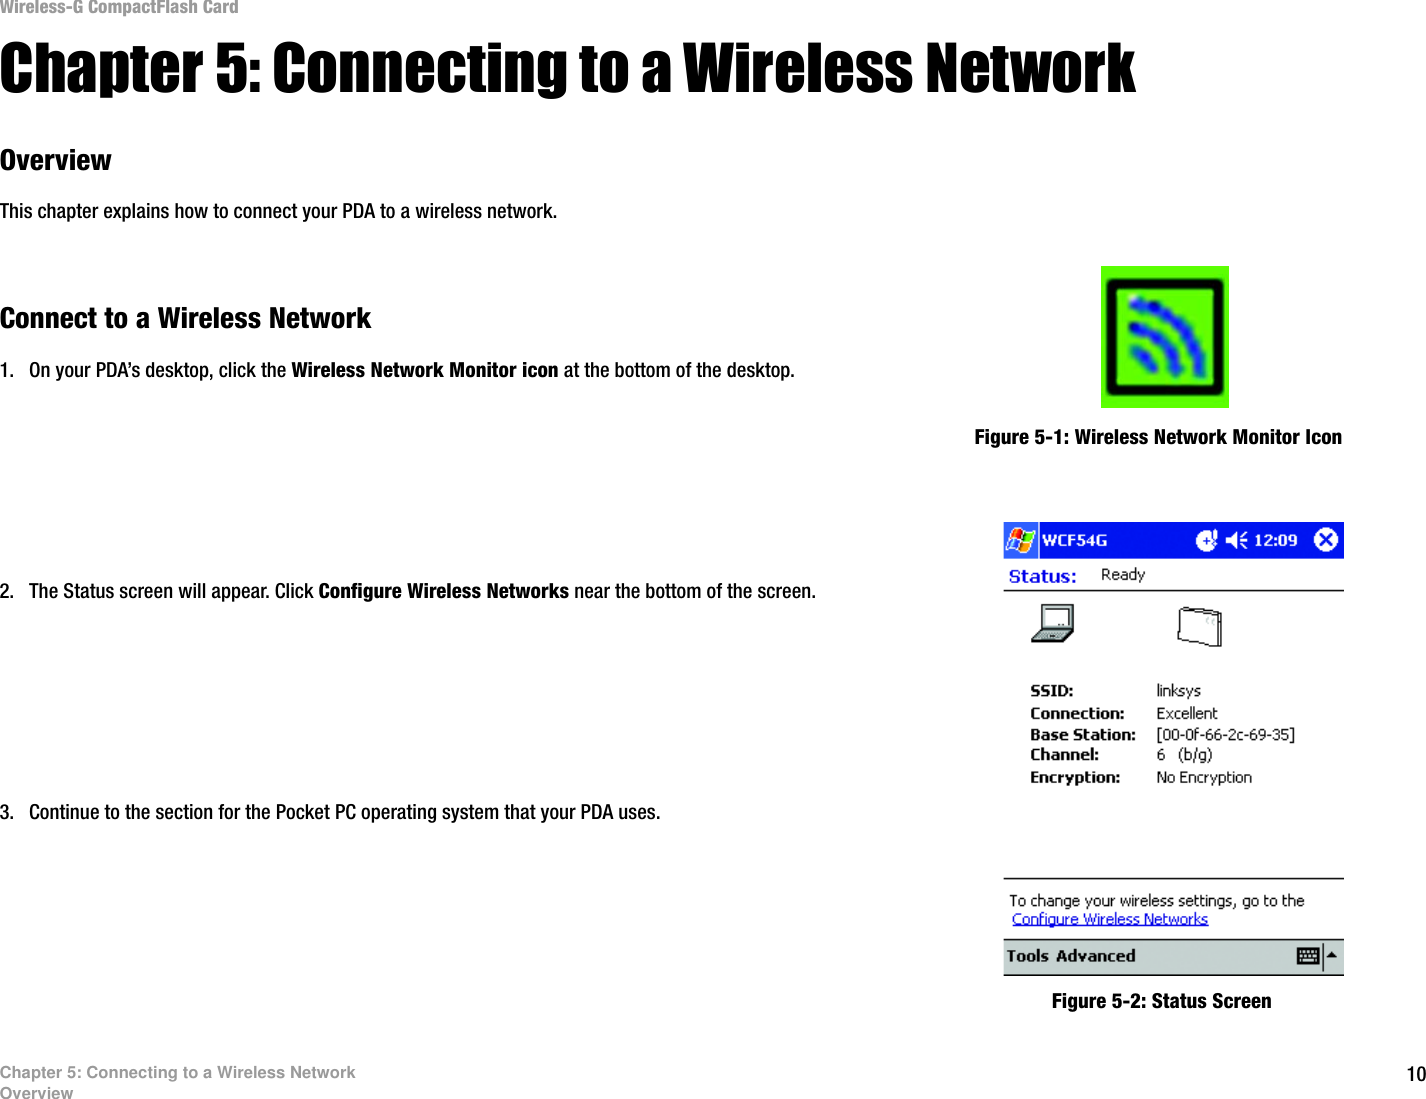 10Chapter 5: Connecting to a Wireless NetworkOverviewWireless-G CompactFlash CardChapter 5: Connecting to a Wireless Network OverviewThis chapter explains how to connect your PDA to a wireless network. Connect to a Wireless Network1. On your PDA’s desktop, click the Wireless Network Monitor icon at the bottom of the desktop.2. The Status screen will appear. Click Configure Wireless Networks near the bottom of the screen.3. Continue to the section for the Pocket PC operating system that your PDA uses.Figure 5-1: Wireless Network Monitor IconFigure 5-2: Status Screen